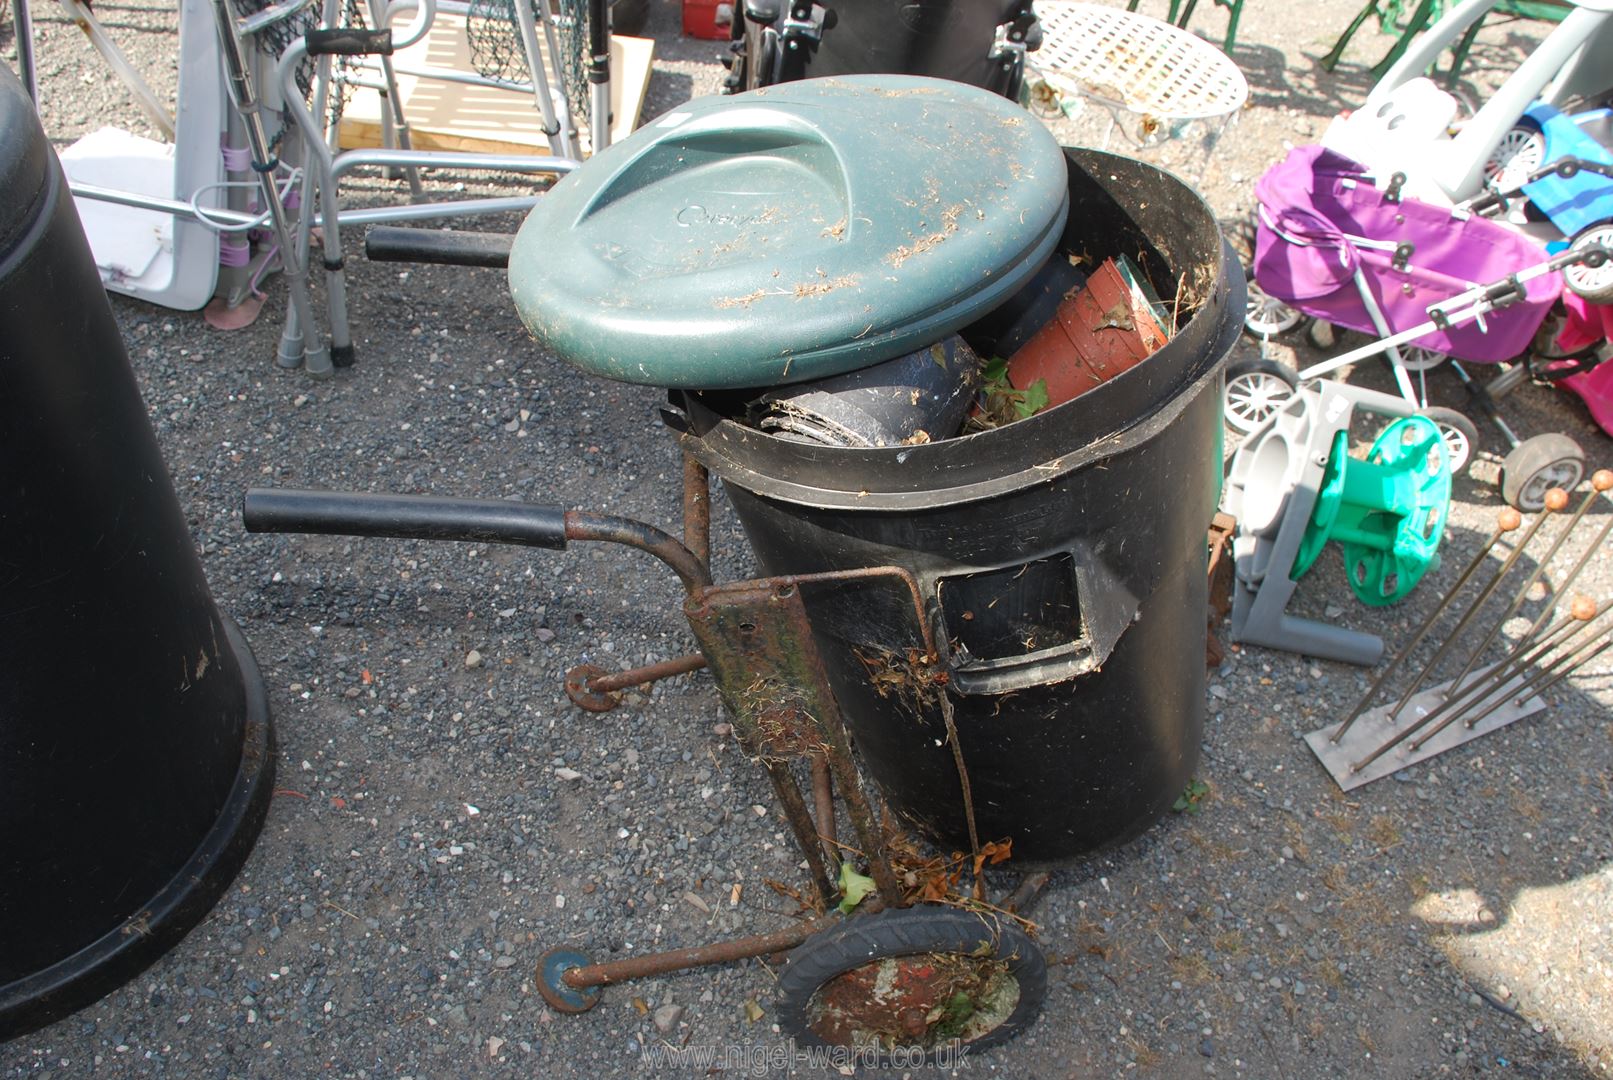 A dustbin with carrier and mixed flower pots.